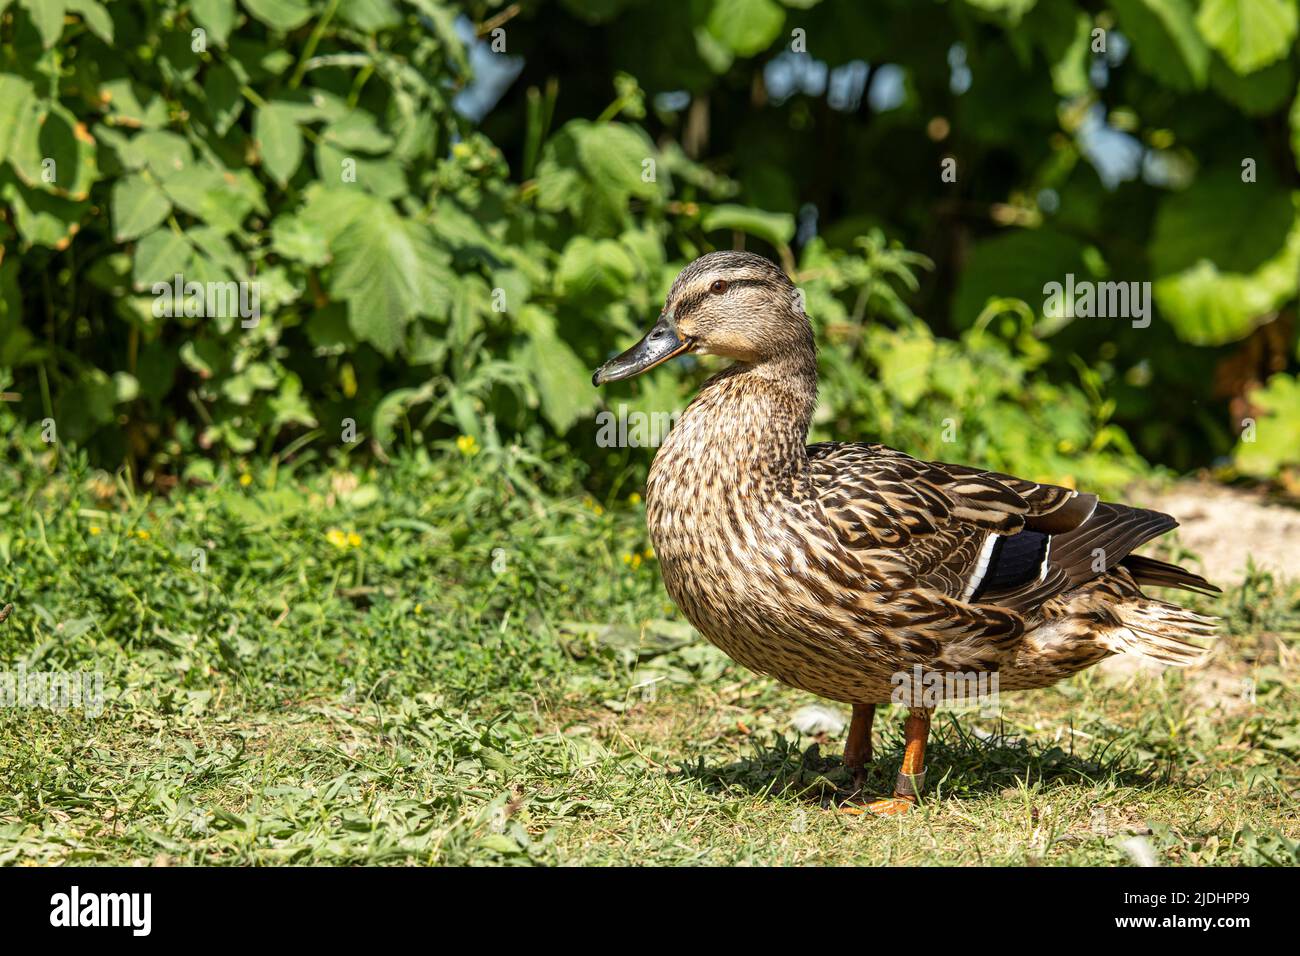 Portrait of a standing, female mallard with a natural, green background Stock Photo